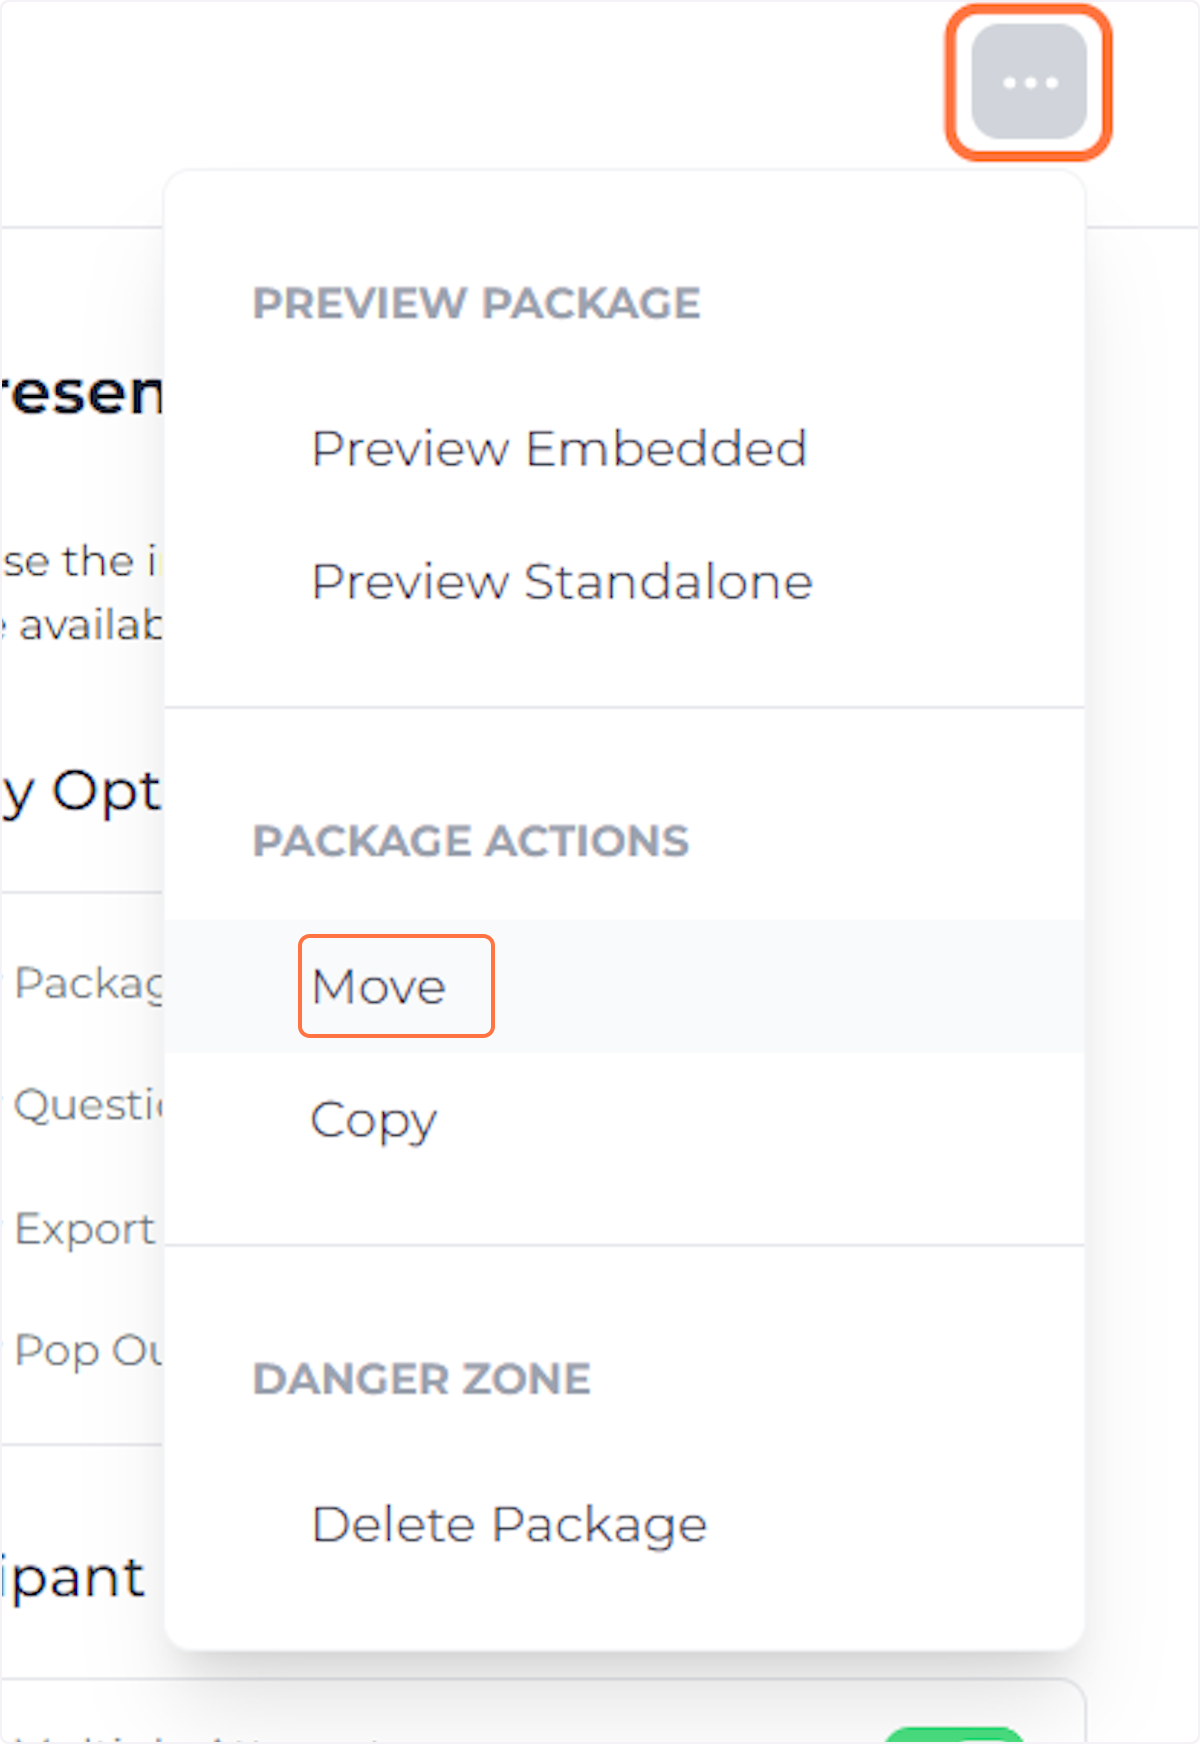 Open the 'Package Actions' menu, and click 'Move'.